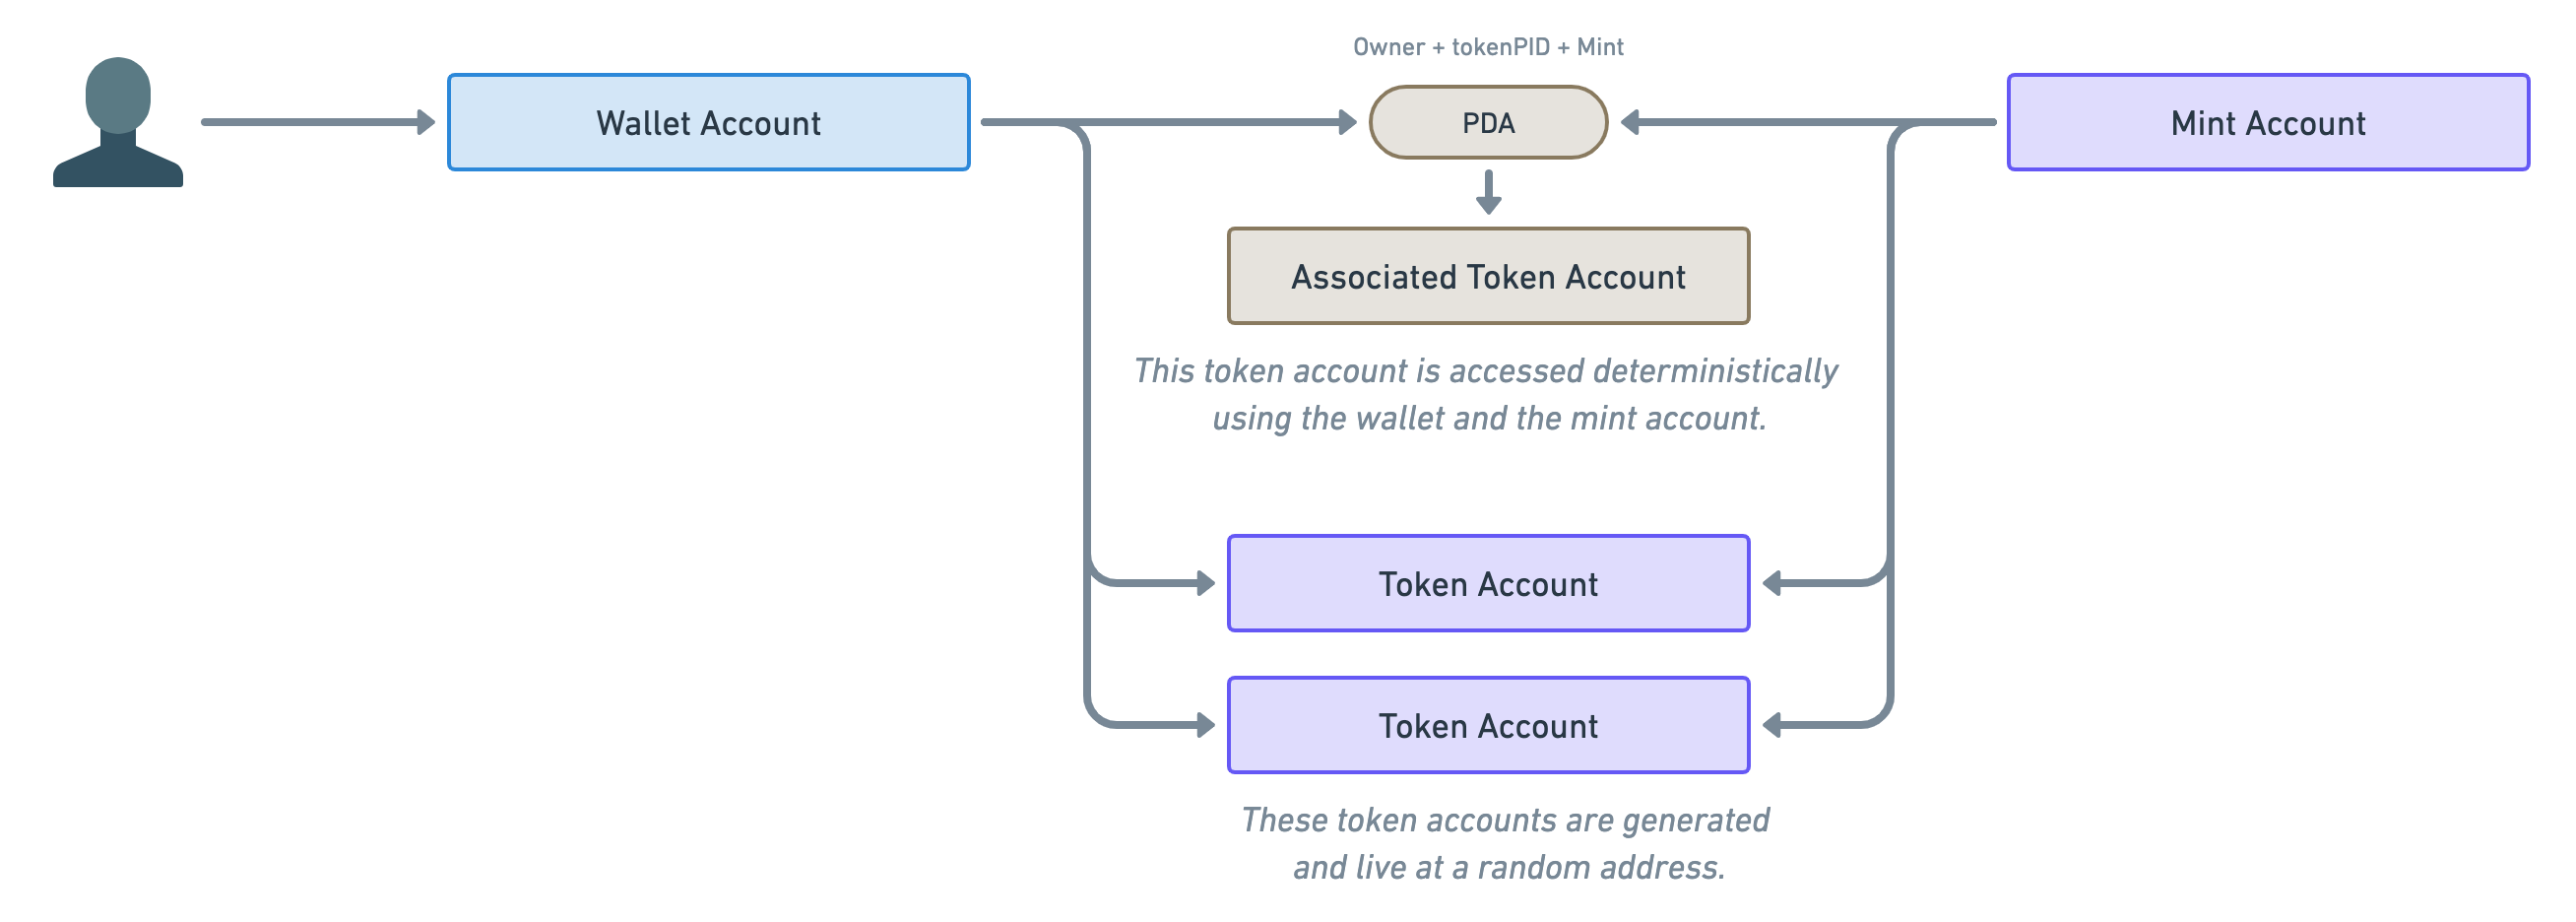 Diagram showing a user icon pointing to a wallet account which connects to a mint account through different ways. The first way is using a PDA. The wallet account and the mint account both point to a PDA pill which points to a brown rectangle labelled “Associated Token Account”. Above the PDA pill is written, “Owner + tokenPID + Mint” representing the seeds of the PDA. Below the “Associated Token Account” rectangle reads “This token account is accessed deterministically using the wallet and the mint account.” The second way wallet and mint accounts are linked together is via two normal “Token Accounts” displayed in purple rectangles. Below these two accounts reads “These token accounts are generated and live at a random address.”.